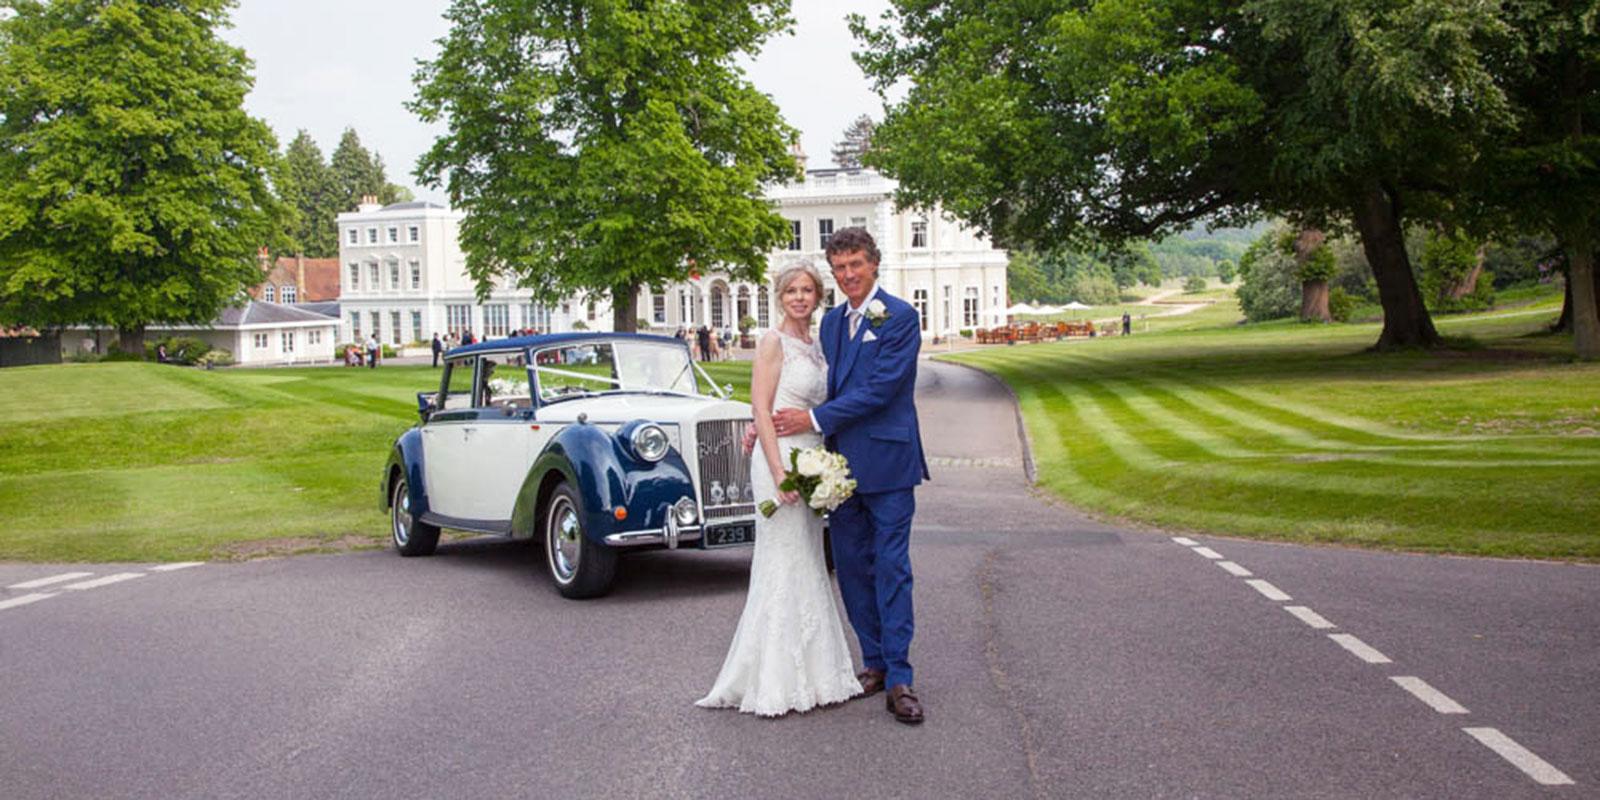 Burhill wedding couple on driveway with car